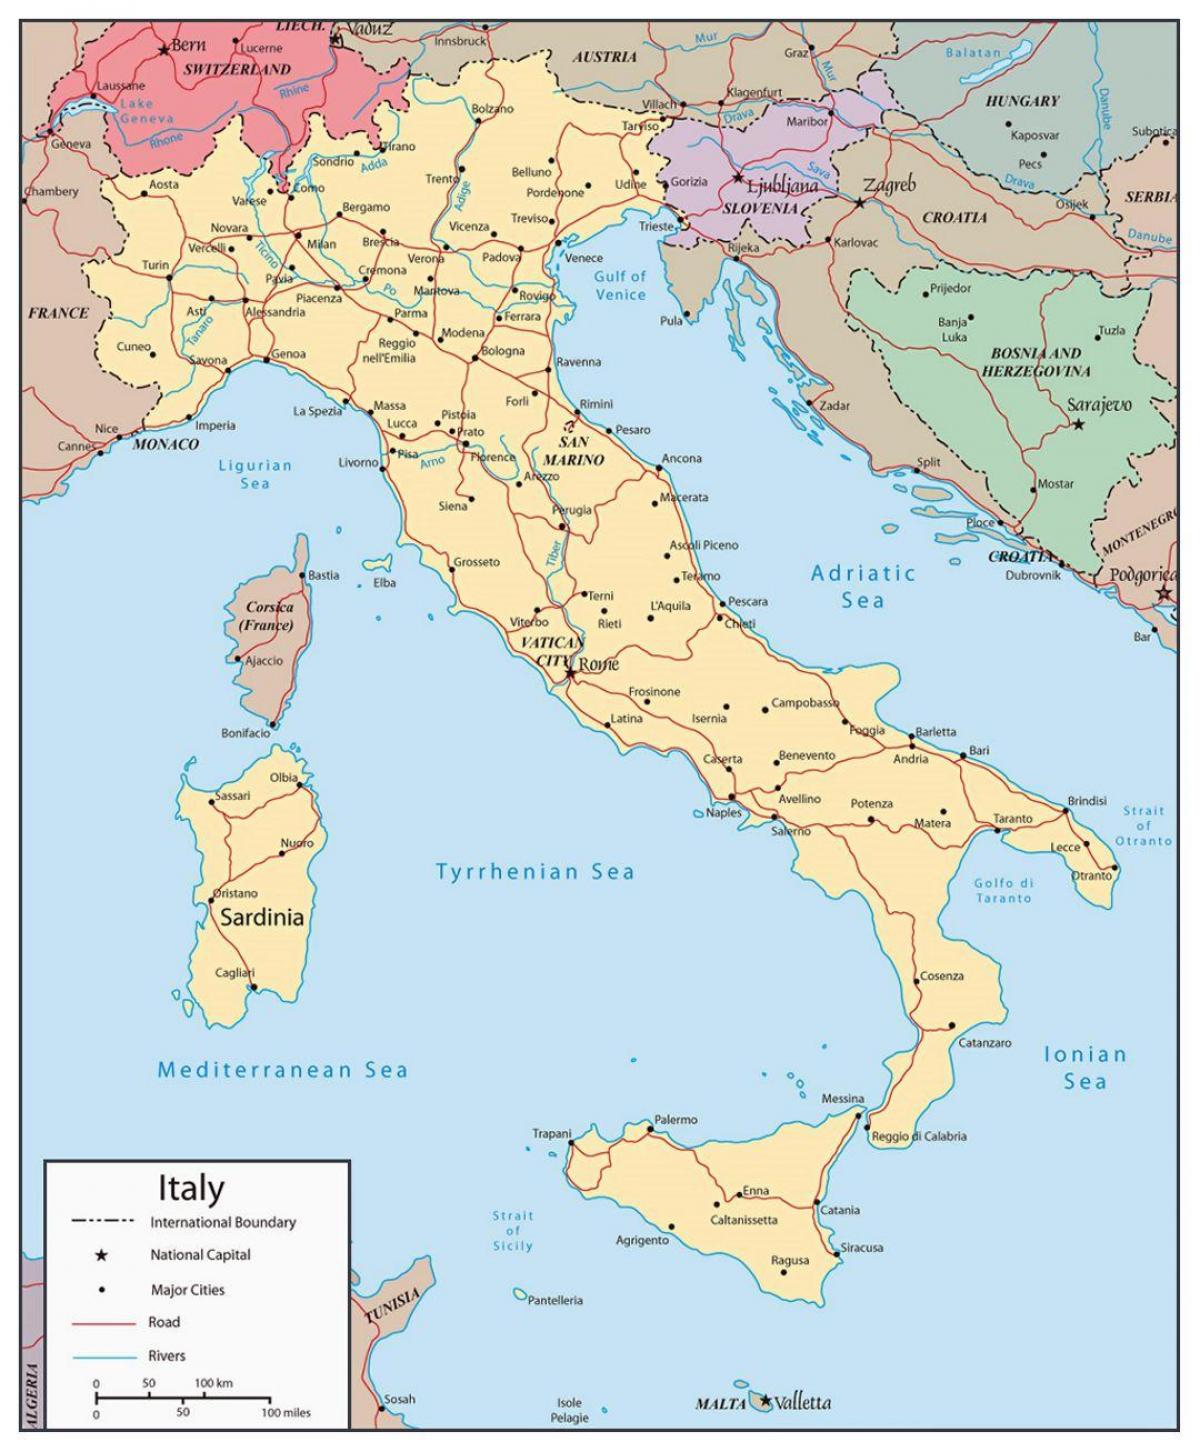 Rivers in Italy map